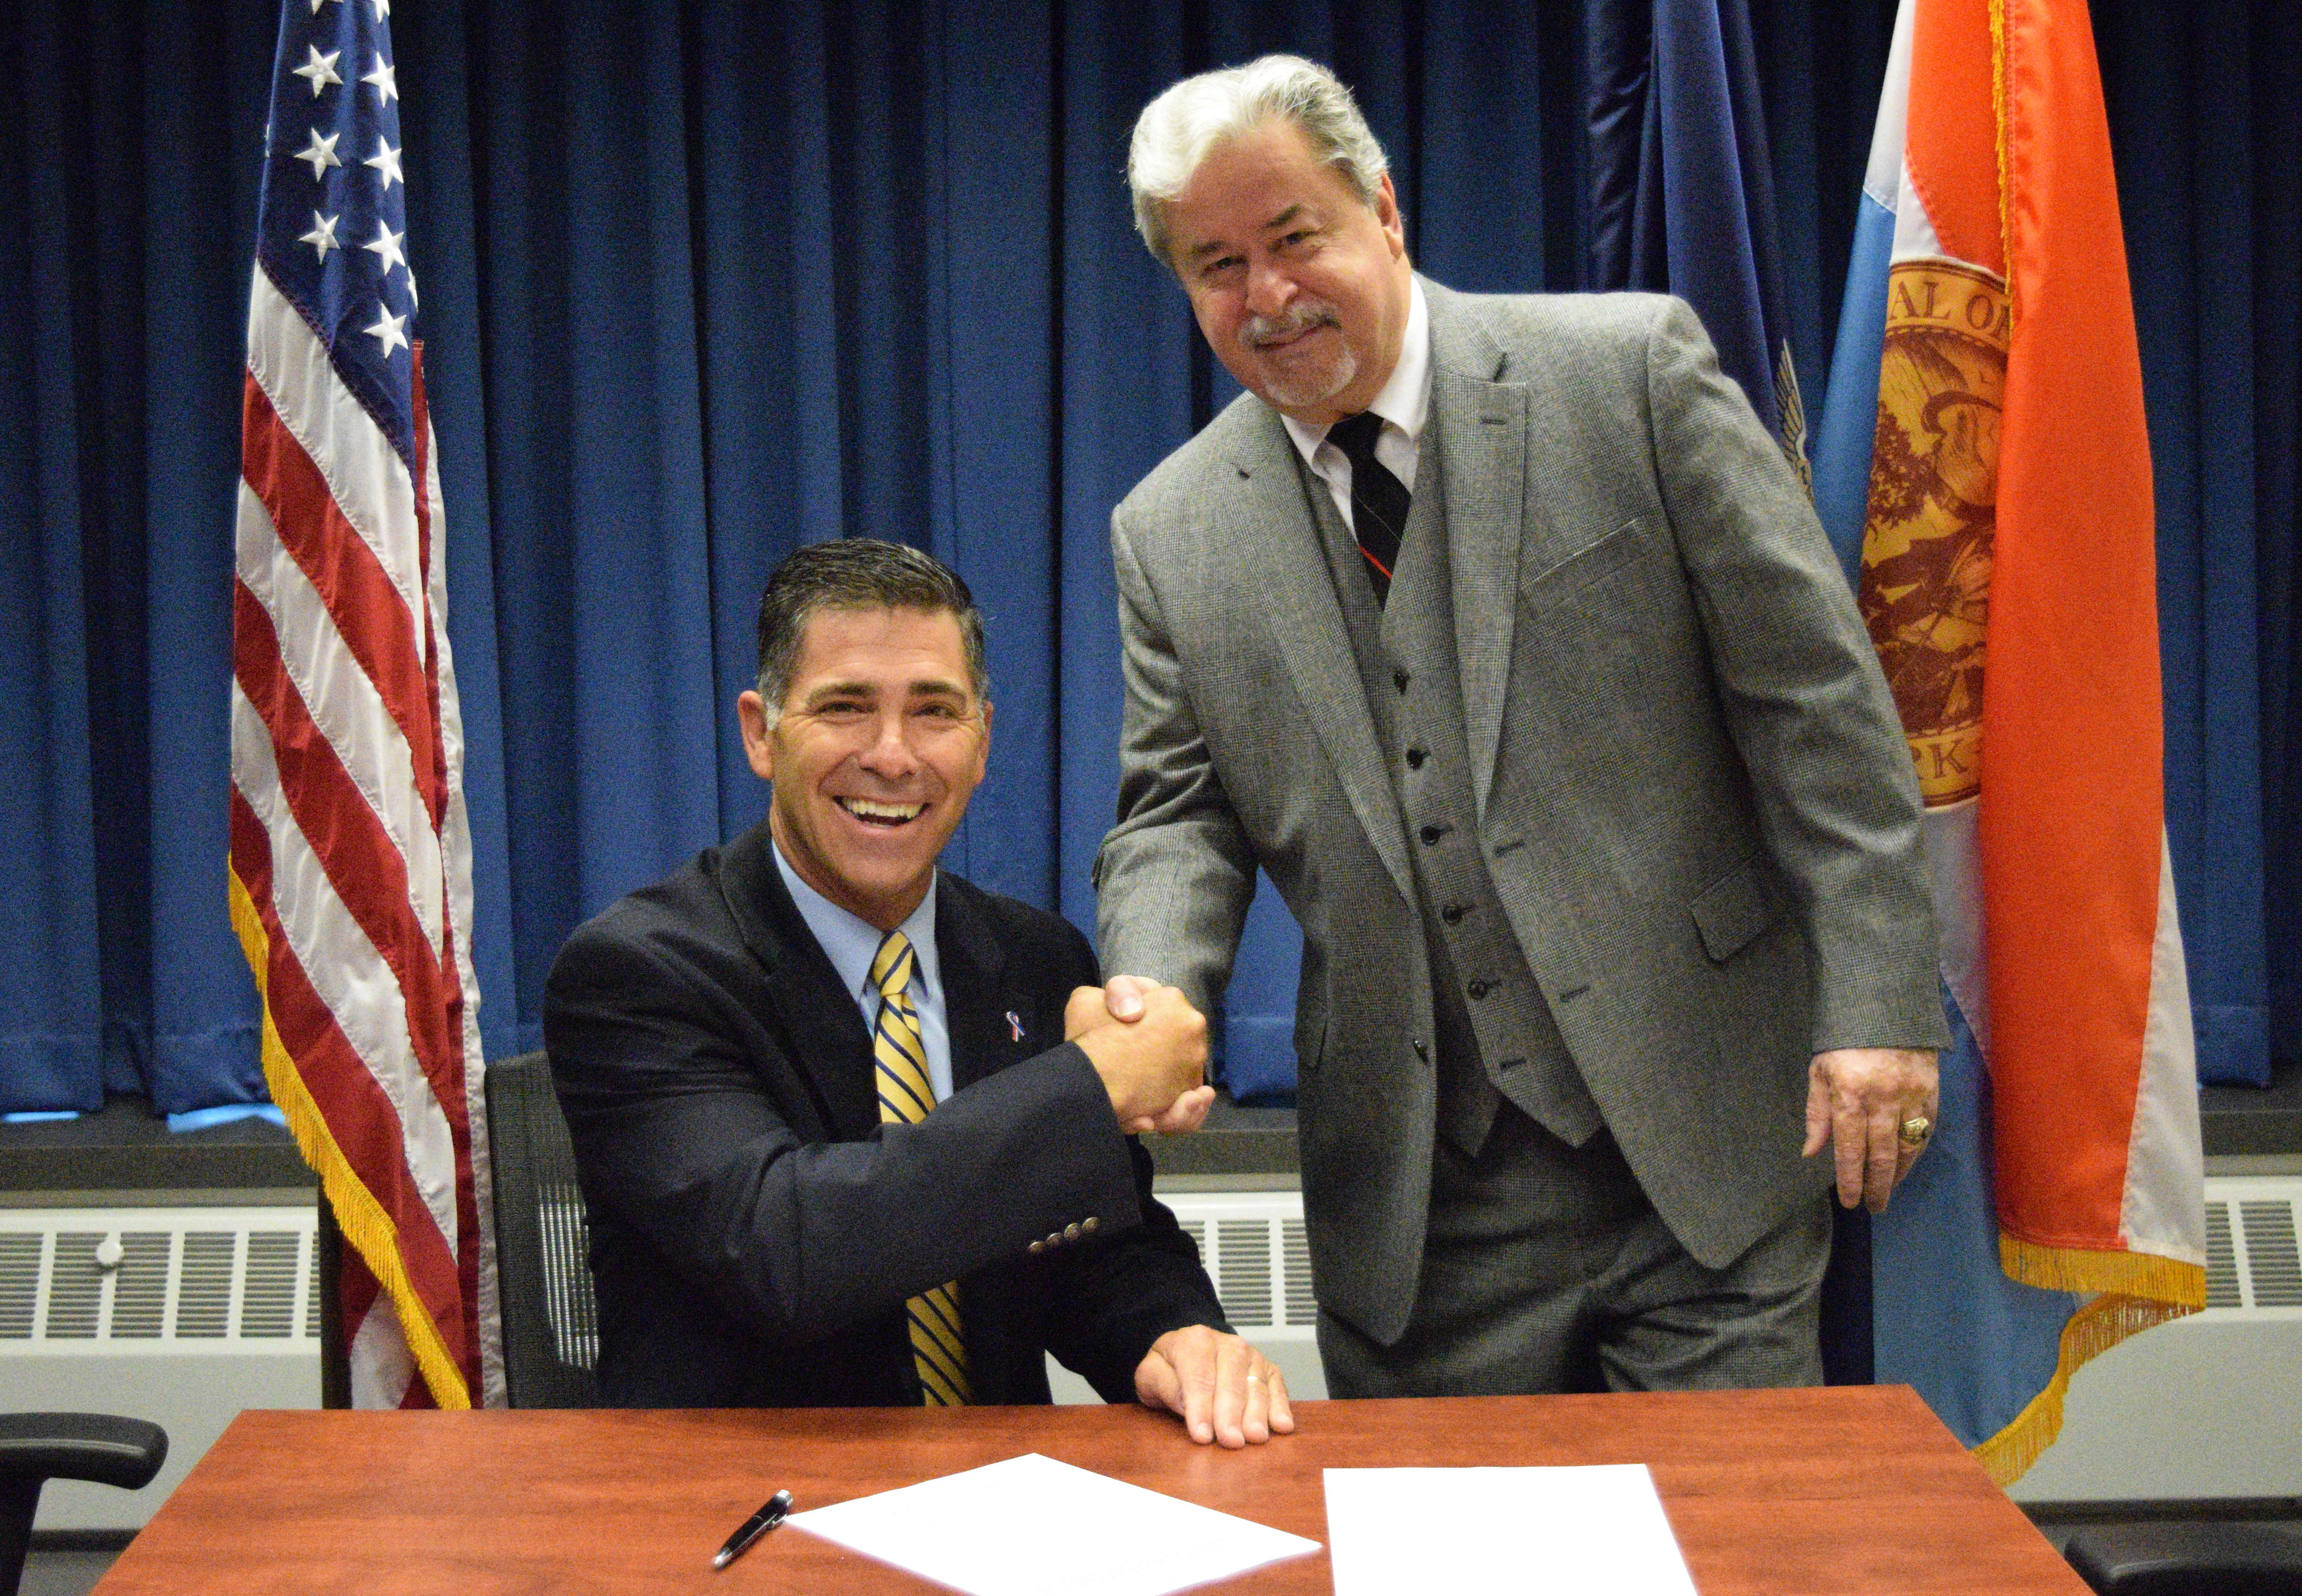 Ulster County Executive Mike Hein Signs Law Designed To ...